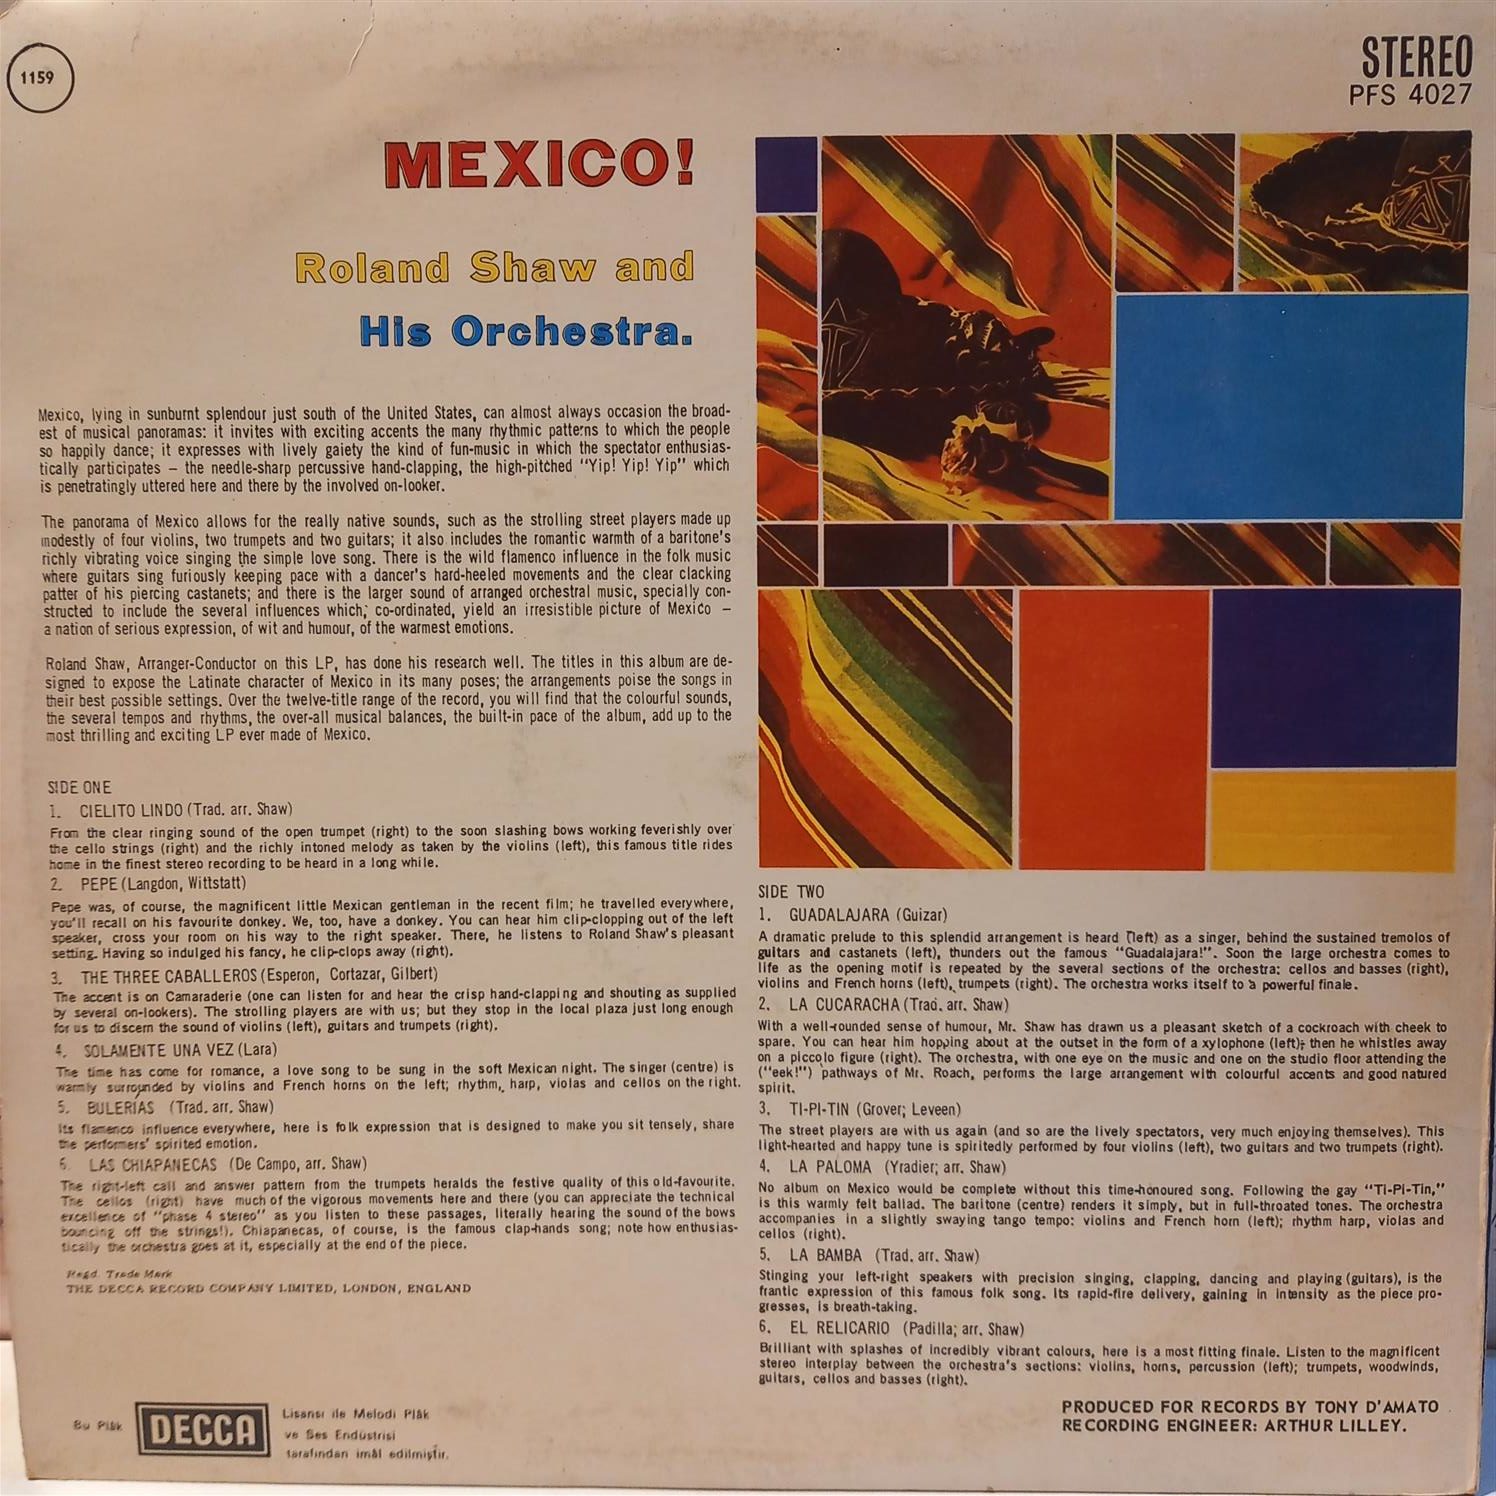 ROLAND SHAW AND HIS ORCHESTRA – MEXICO! ARKA